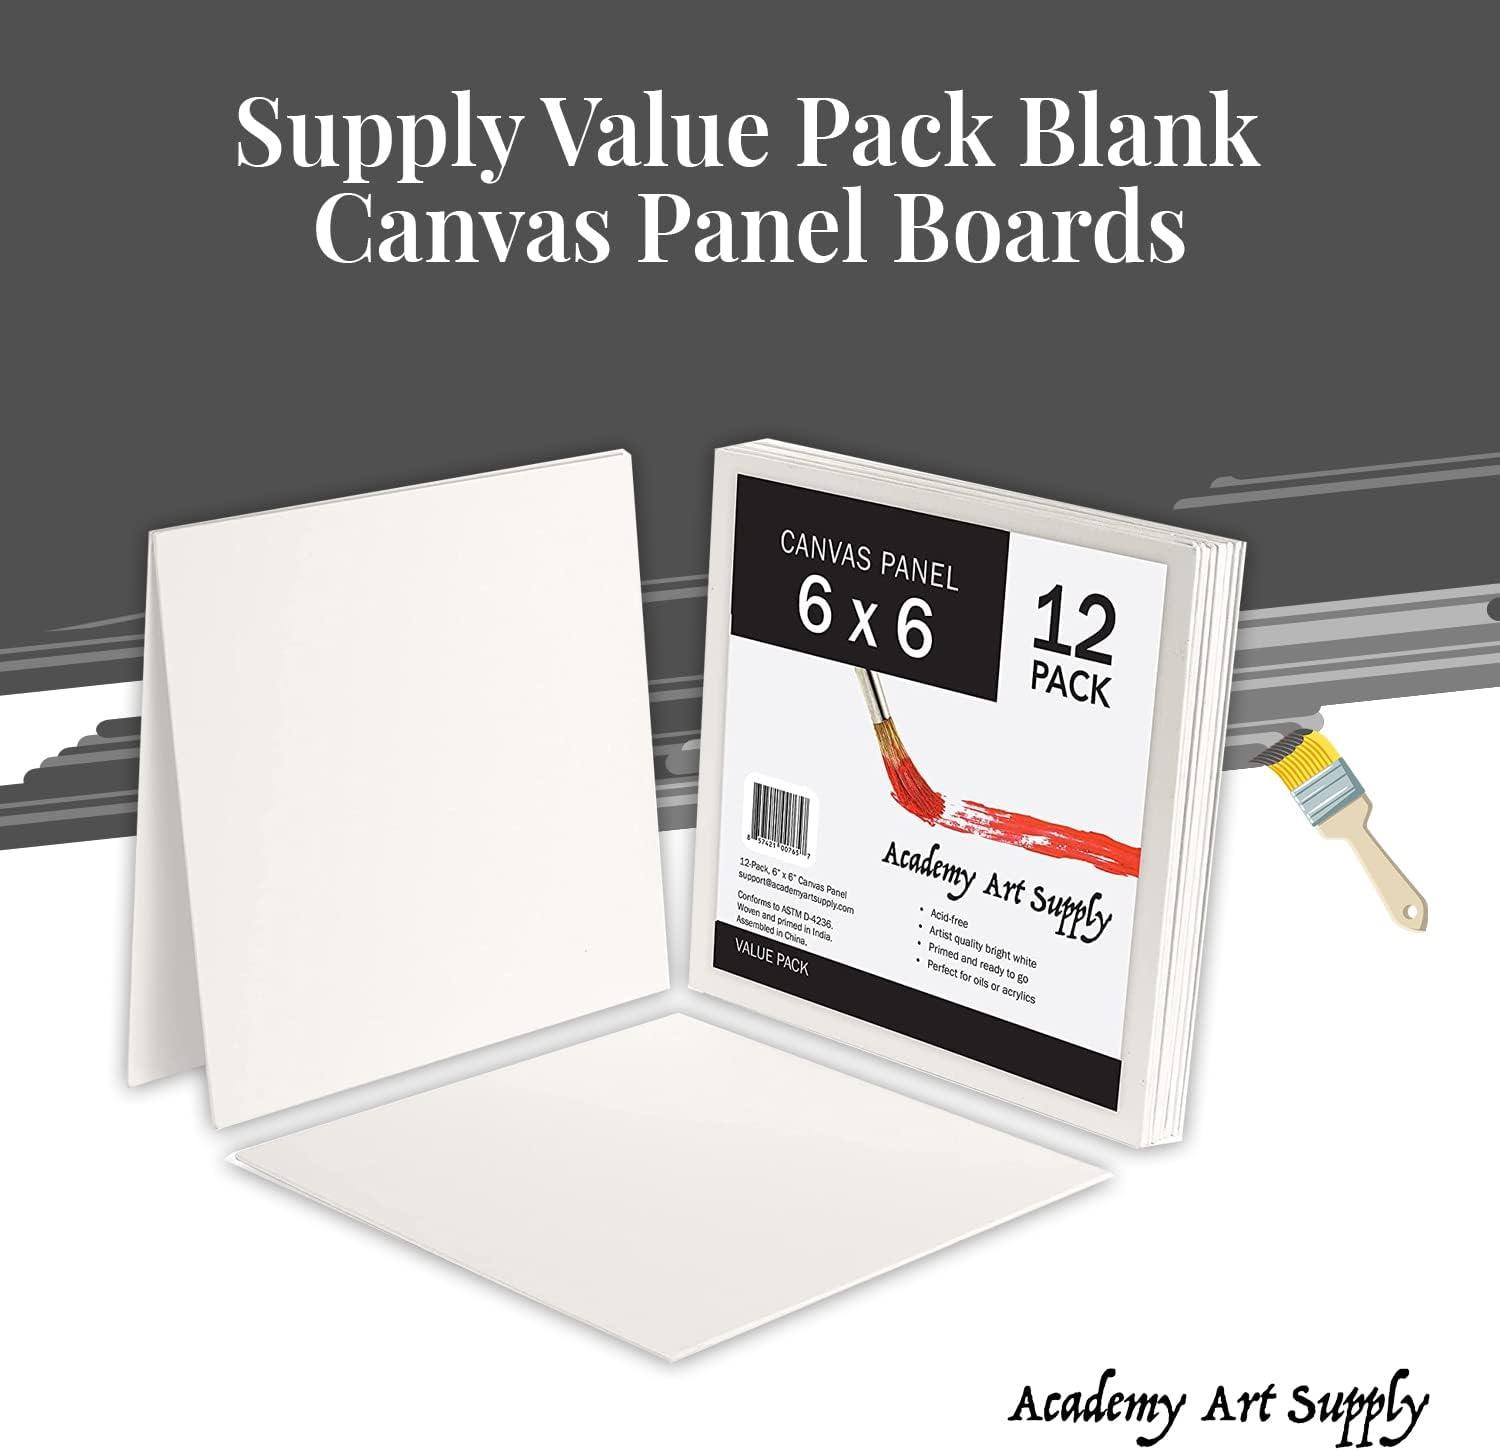 Academy Art Supply Stretched Canvases 16 x 16 inch - 100% Cotton Artist Blank Canvas for Painting, Pre-gessoed, Primed, Acid-Free Canvases, Perfect